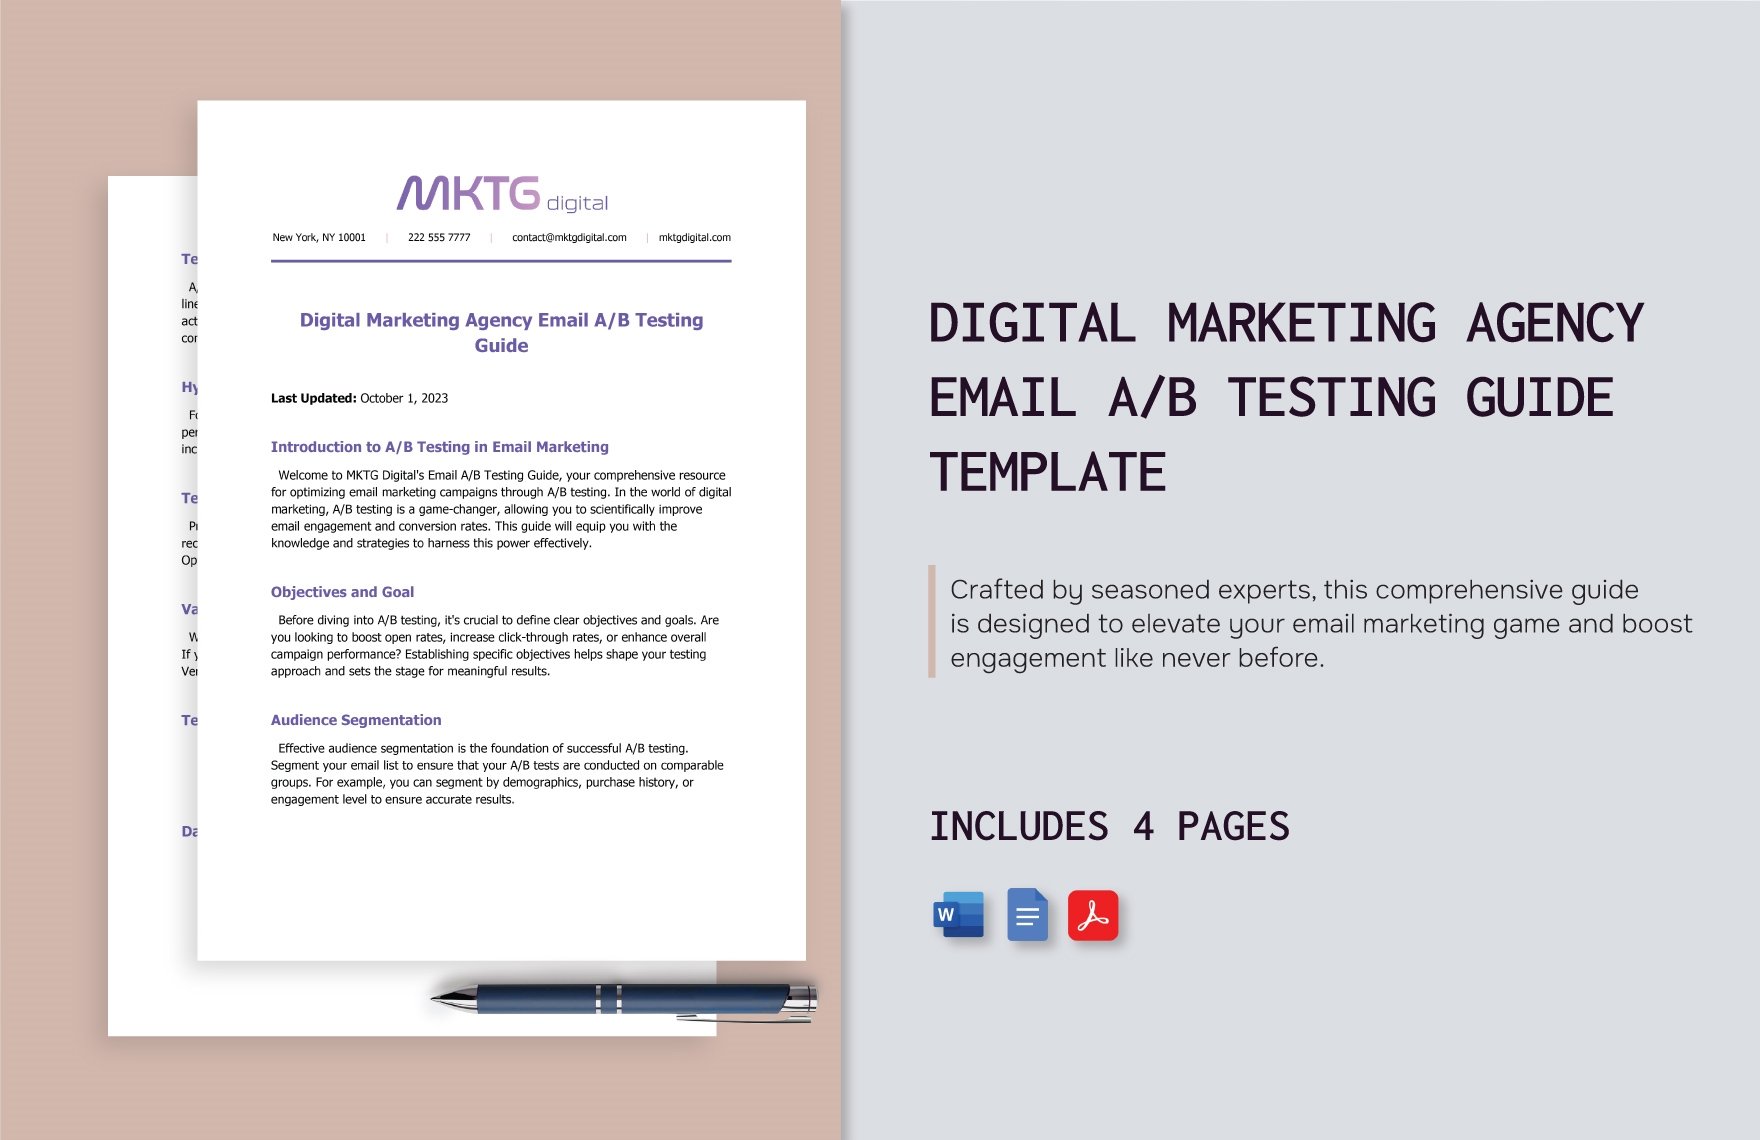 Digital Marketing Agency Email A/B Testing Guide Template in Word, Google Docs, PDF